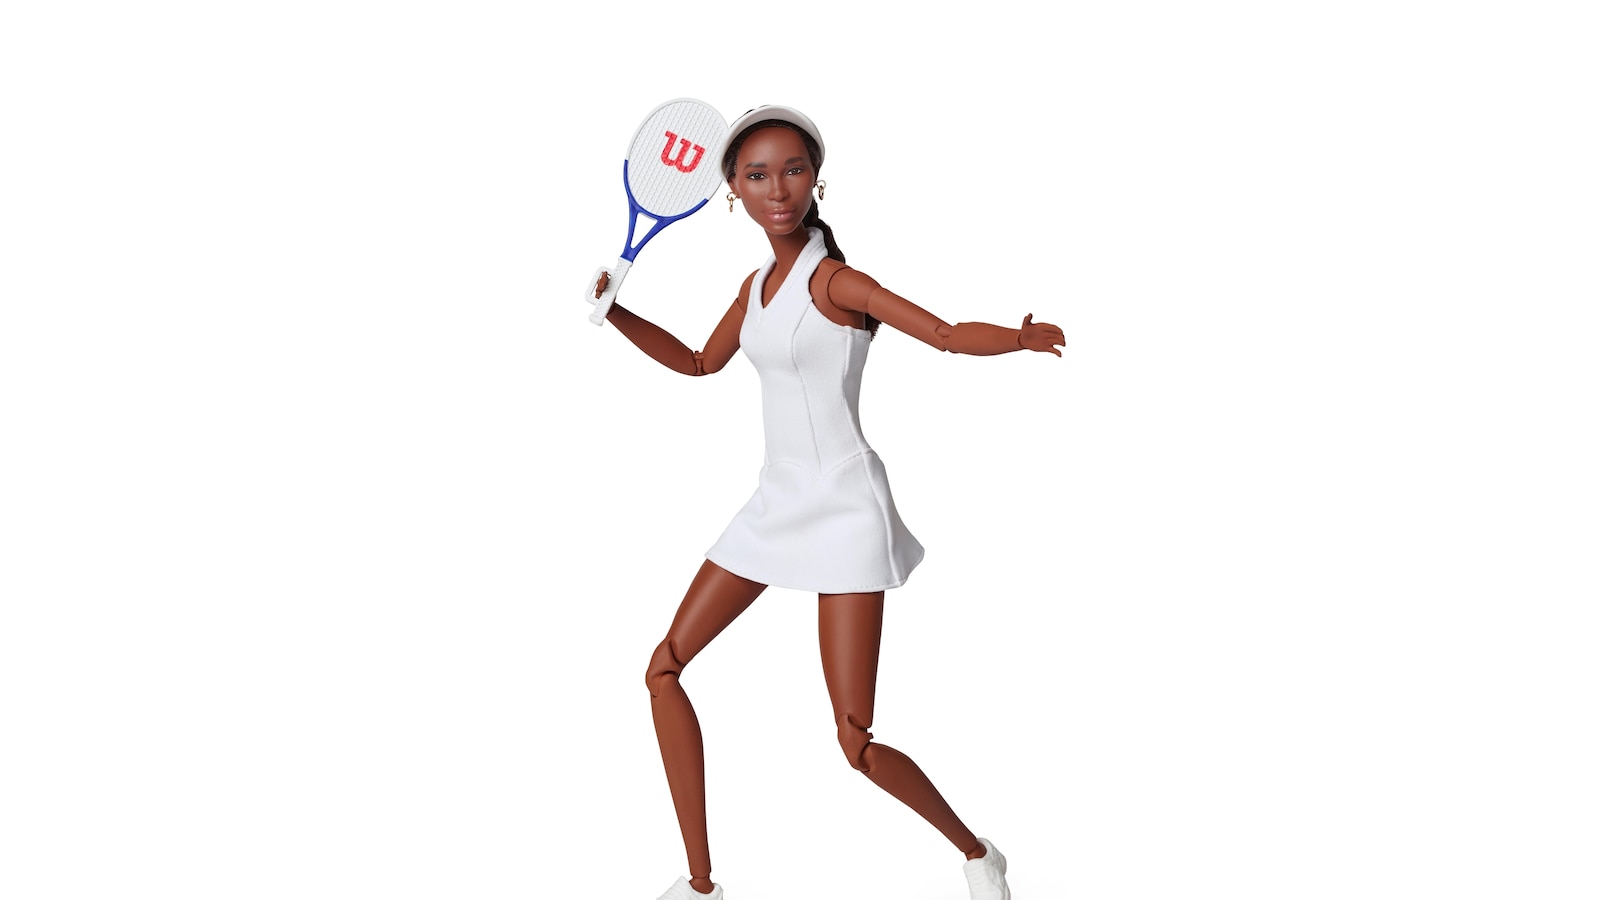 Barbie will make dolls in honor of Venus Williams and other star athletes